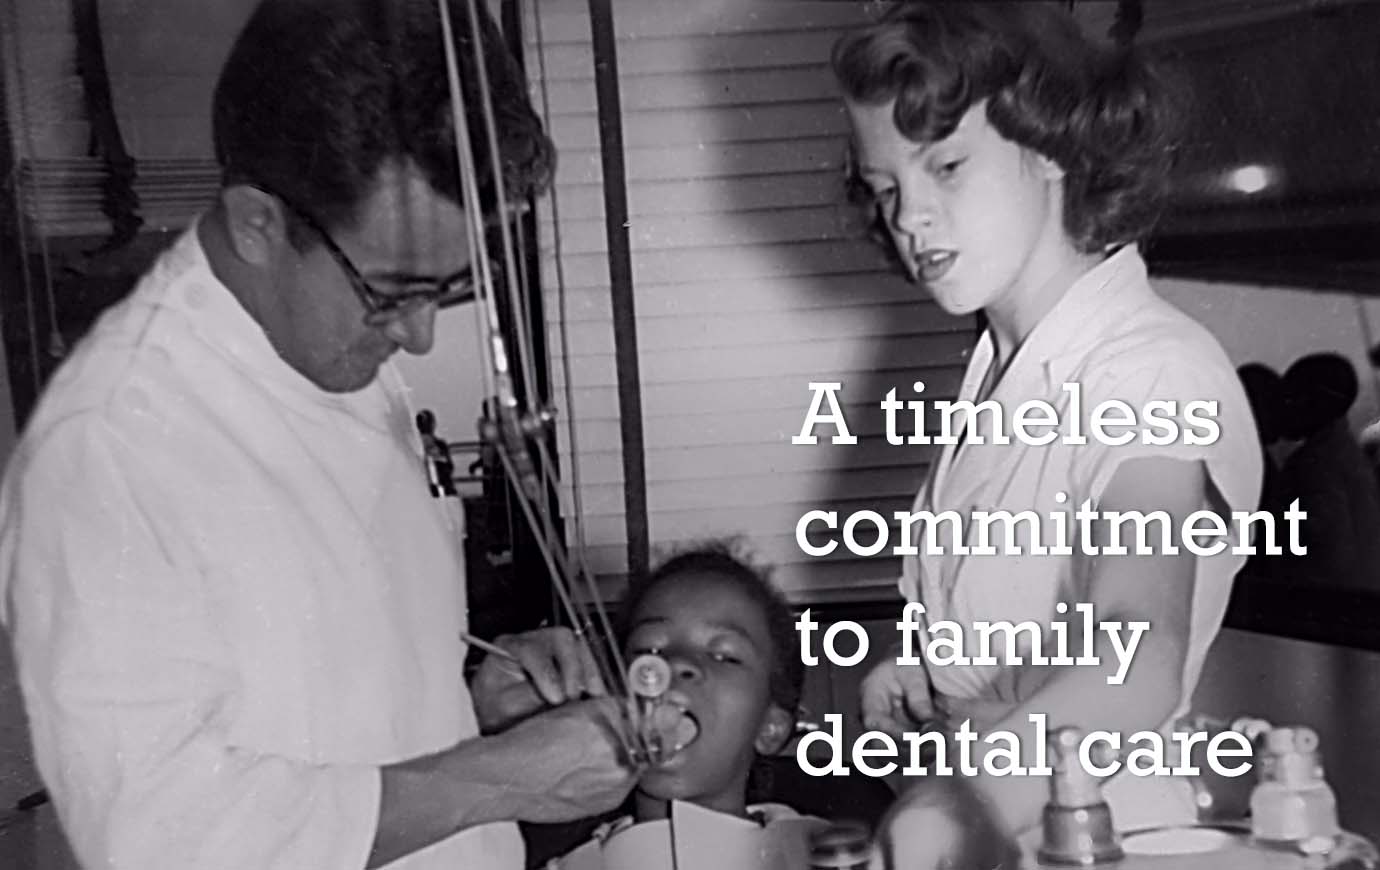 A timeless commitment to family dental care, showing a dentist at work onboard the ship in 1949